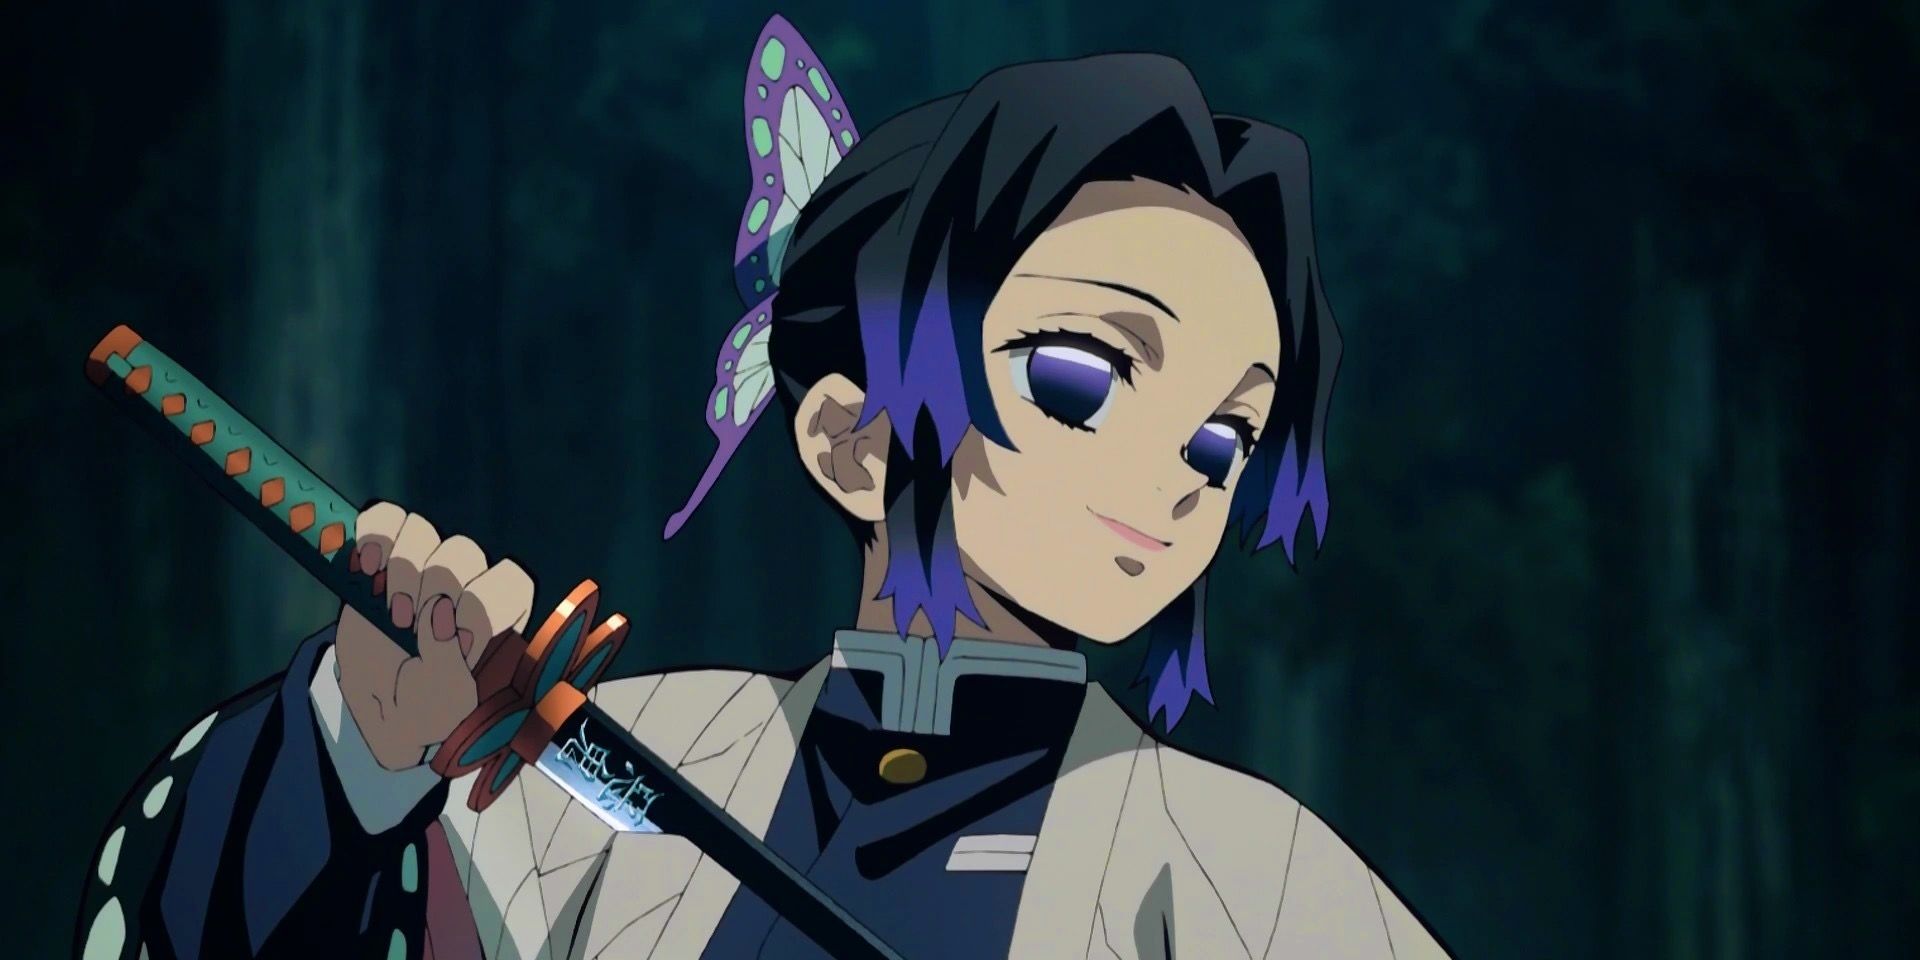 Who is the most beautiful of the demon slayers in the anime series Demon  Slayer? - Quora